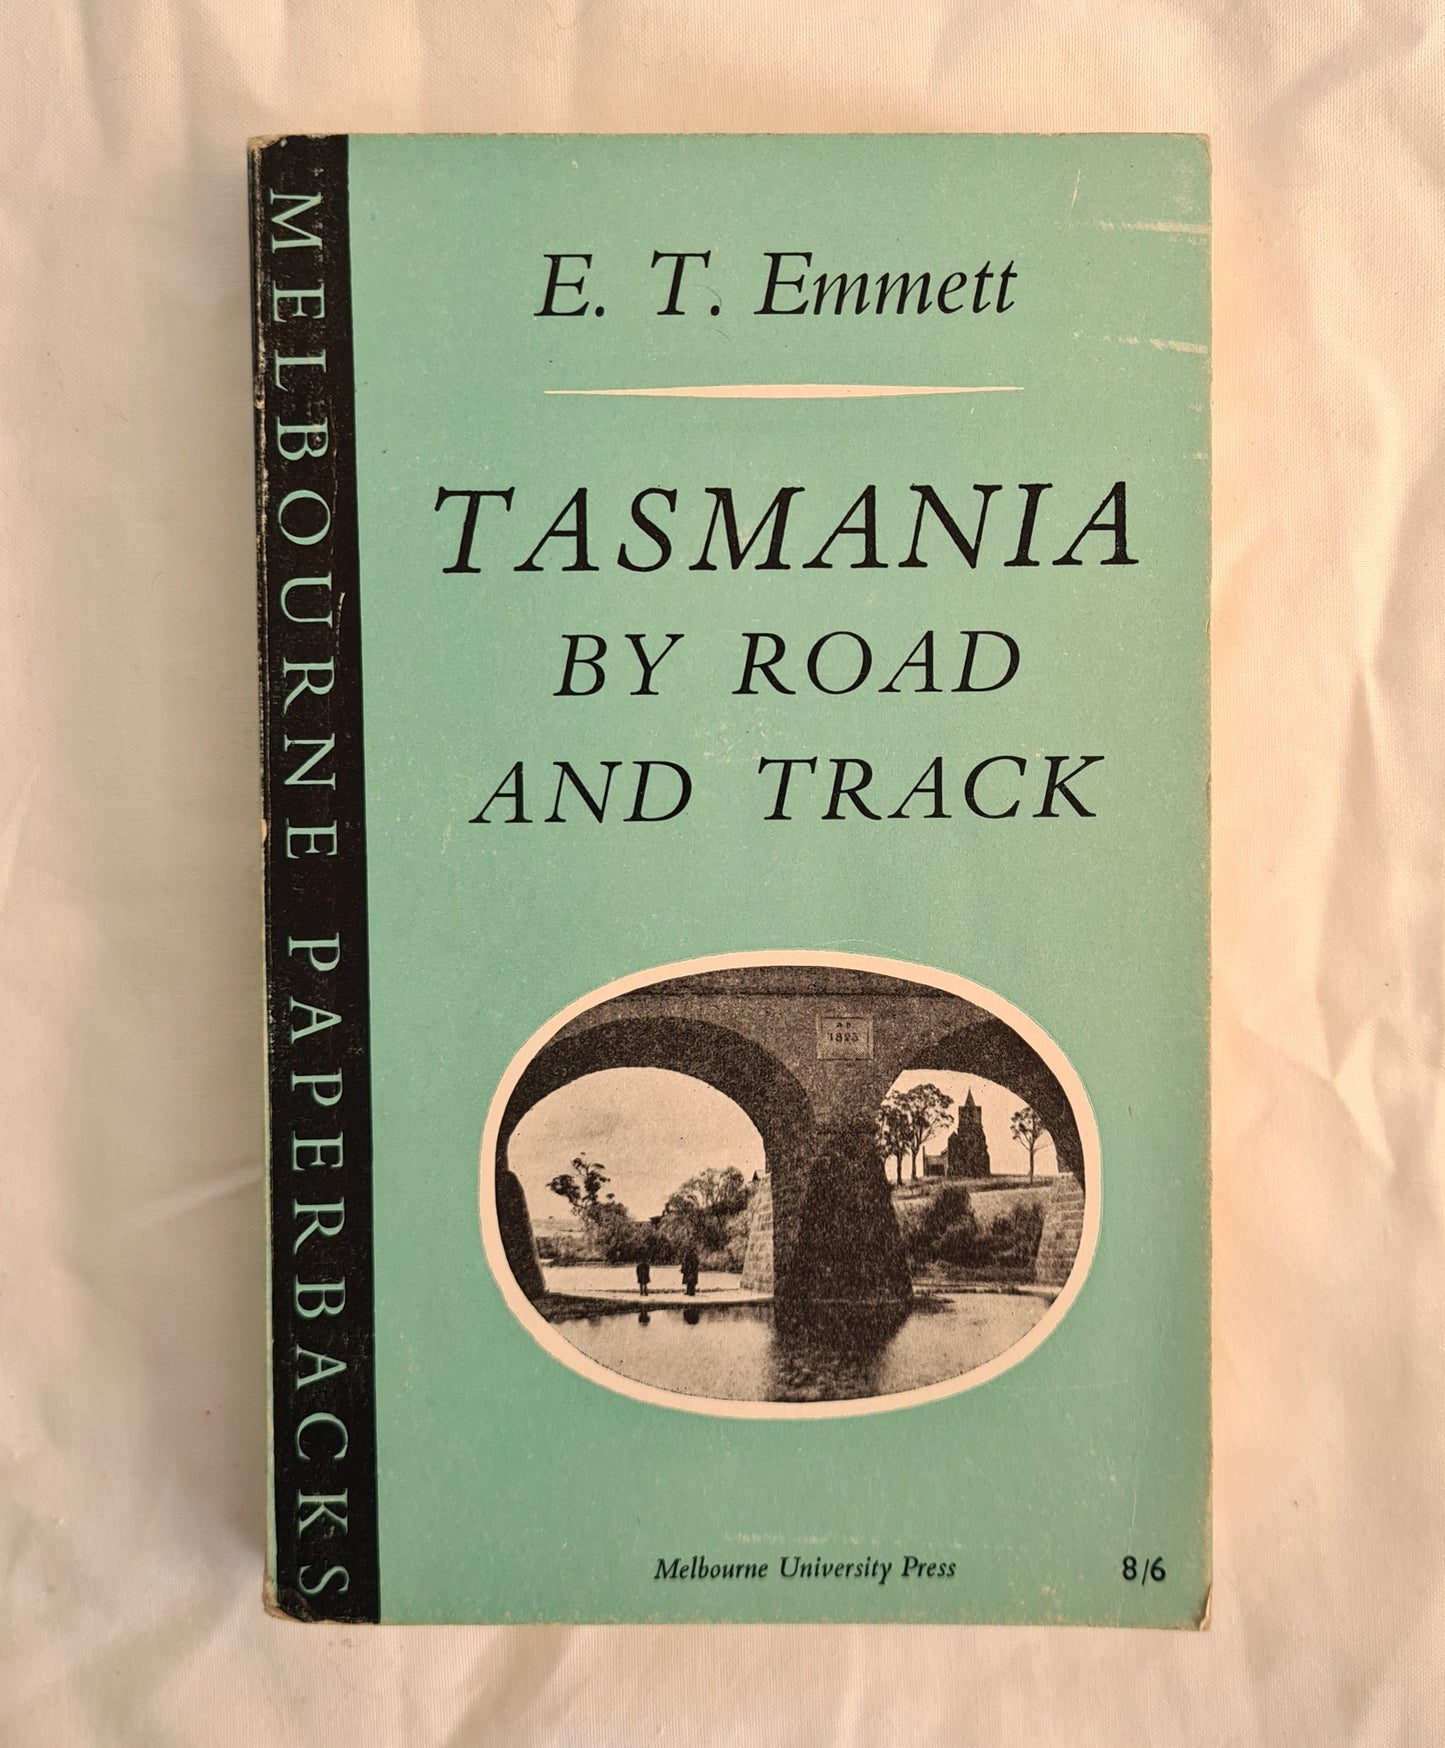 Tasmania  By Road and Track  by E. T. Emmett  Melbourne Paperbacks